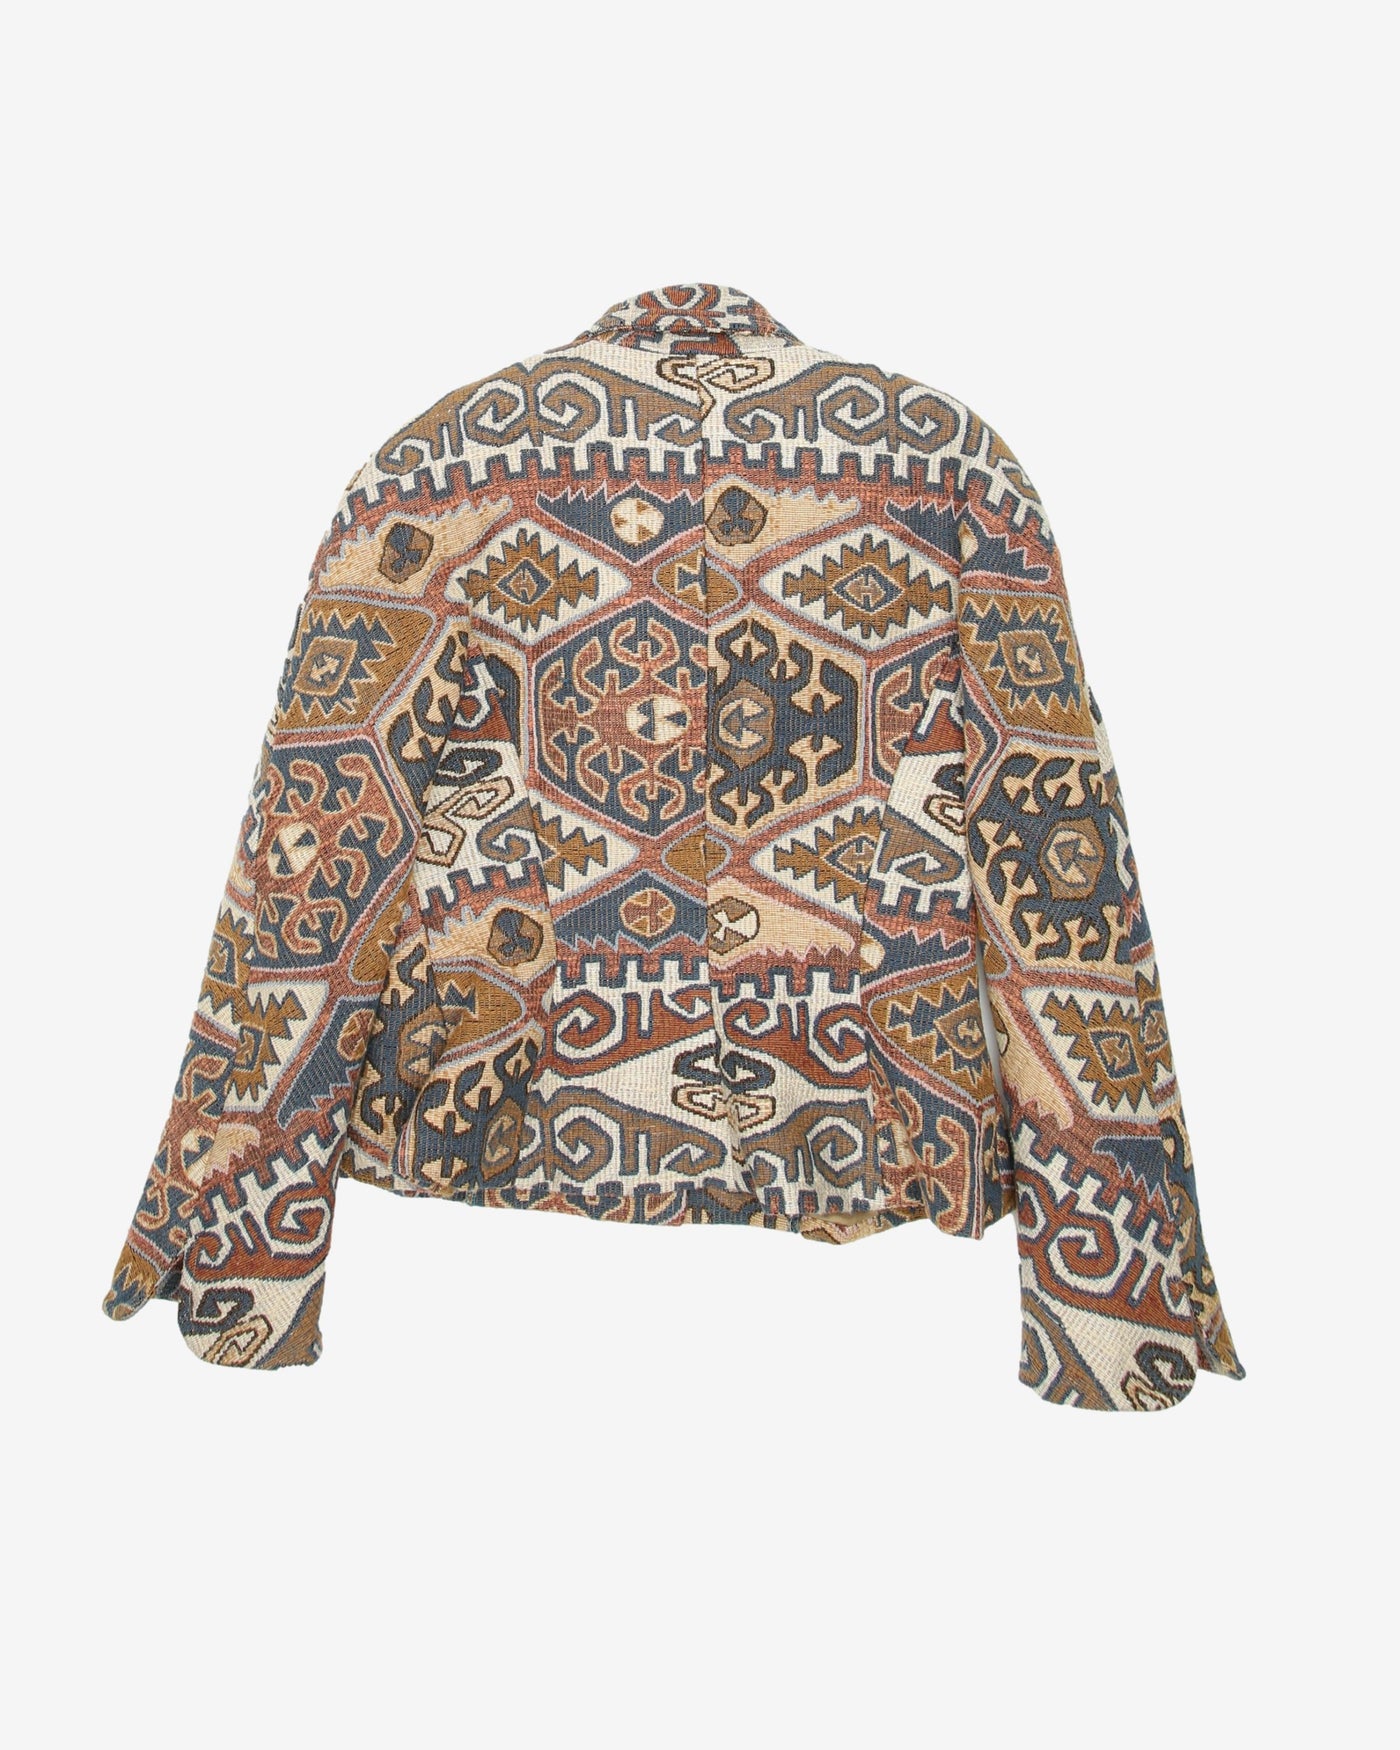 Navajo Inspired Patterned Cotton Fitted Jacket - XS / S